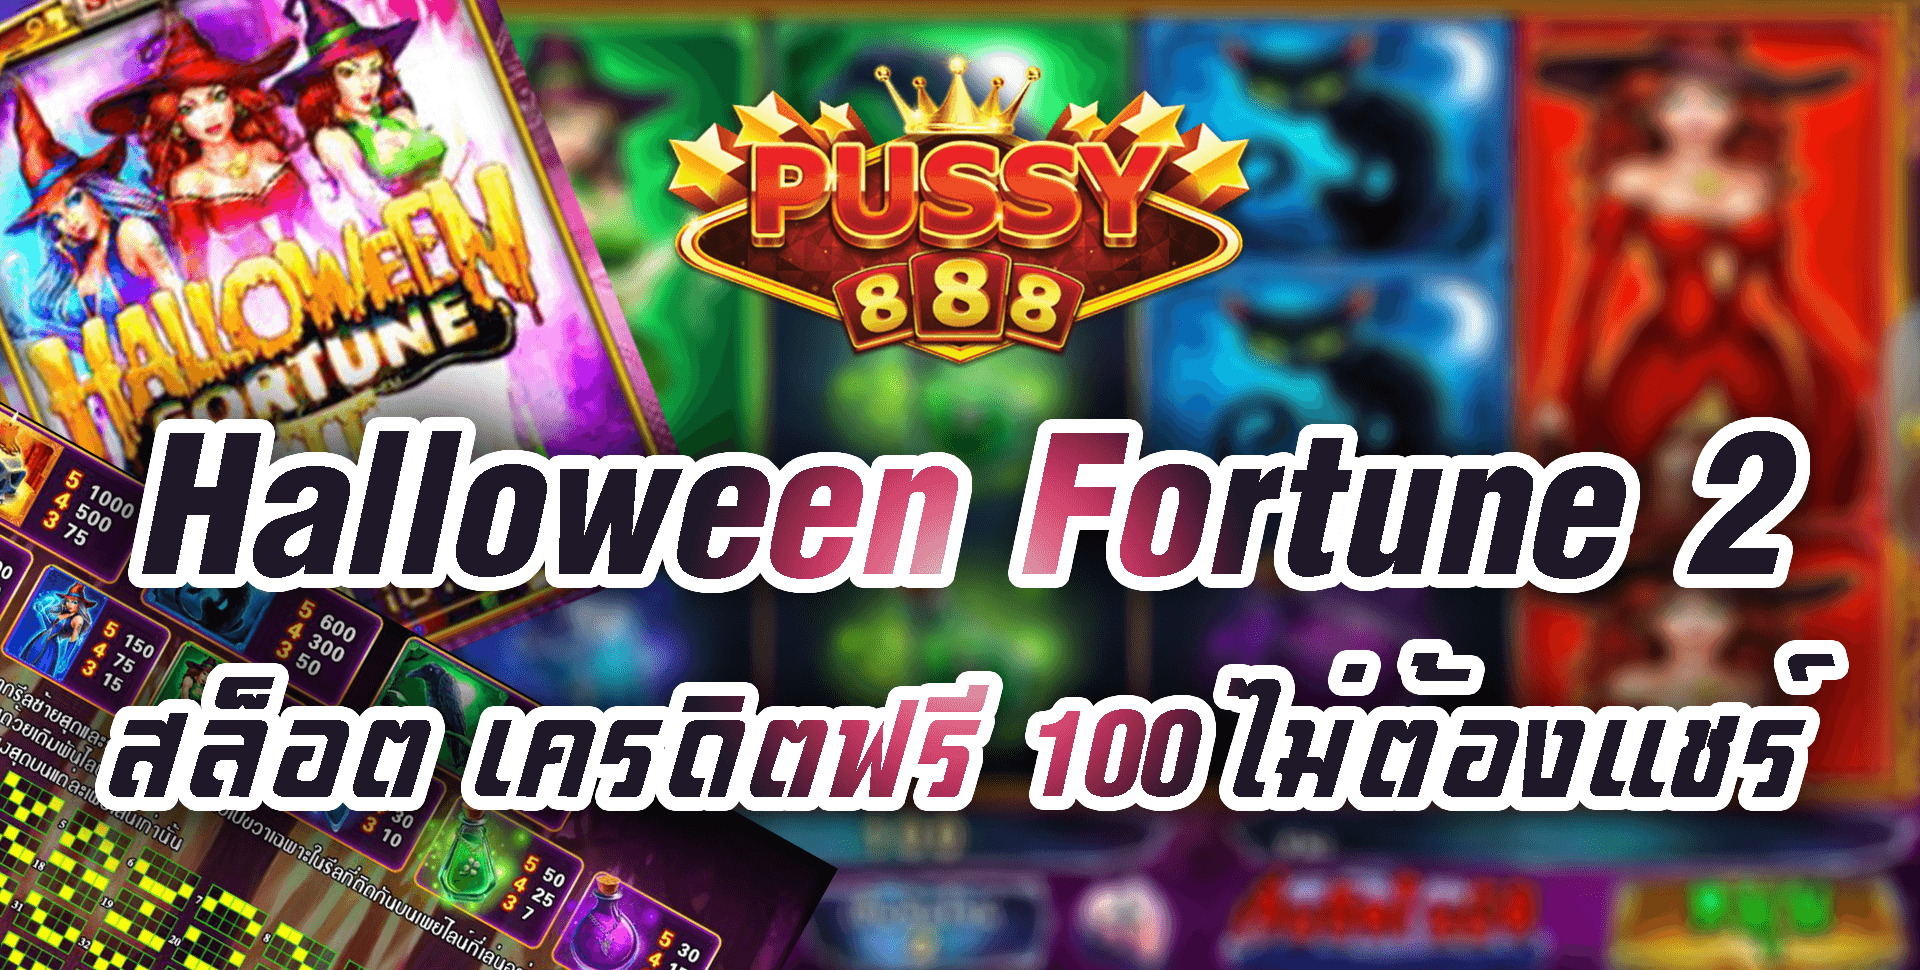 Pussy888-Halloween Fortune 2-5